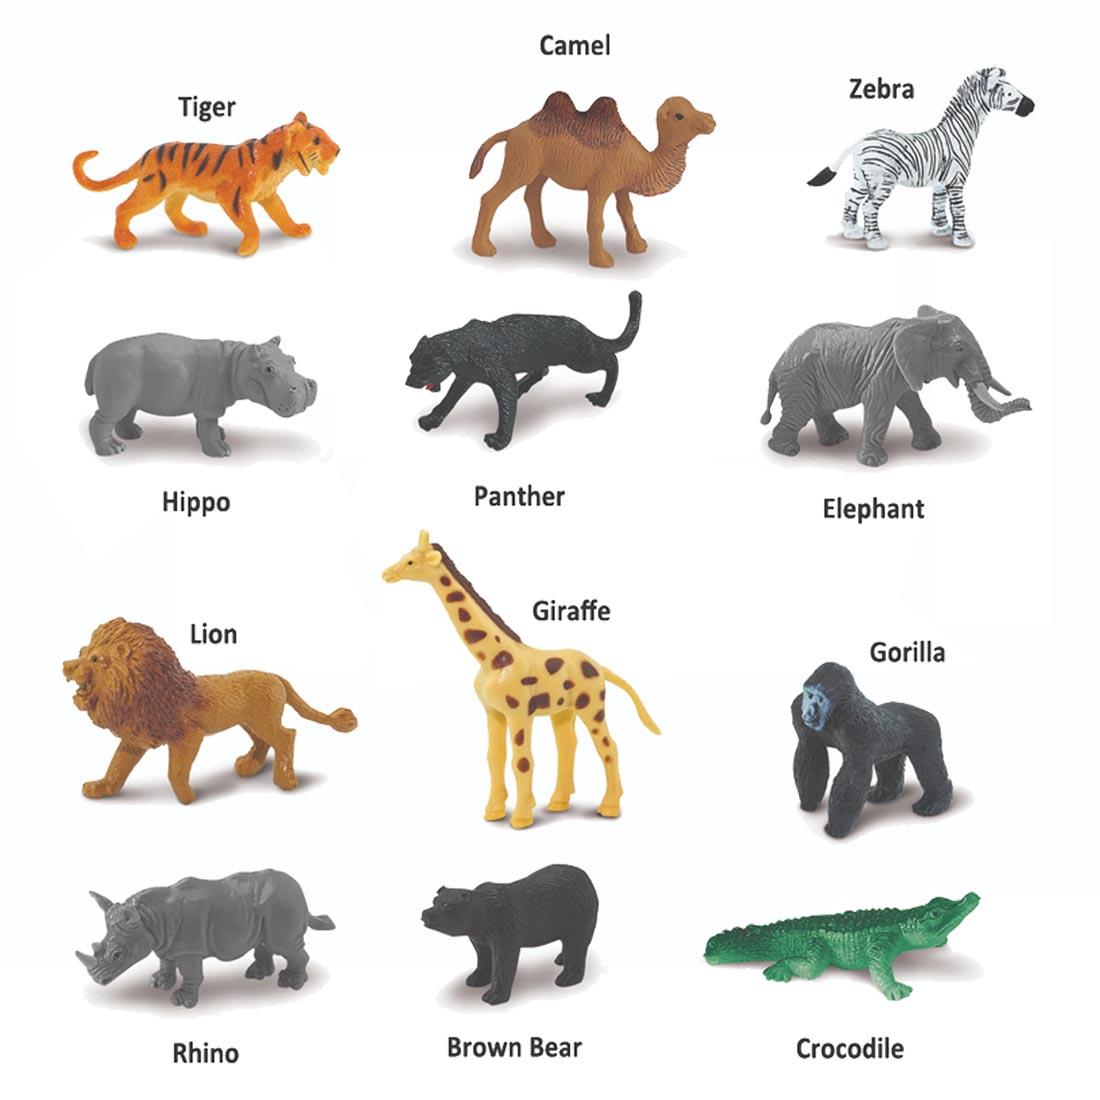 12 creatures from the Wild Figurine Set labeled with their names: tiger, camel, zebra, hippo, panther, elephant, lion, giraffe, gorilla, rhino, brown bear, crocodile